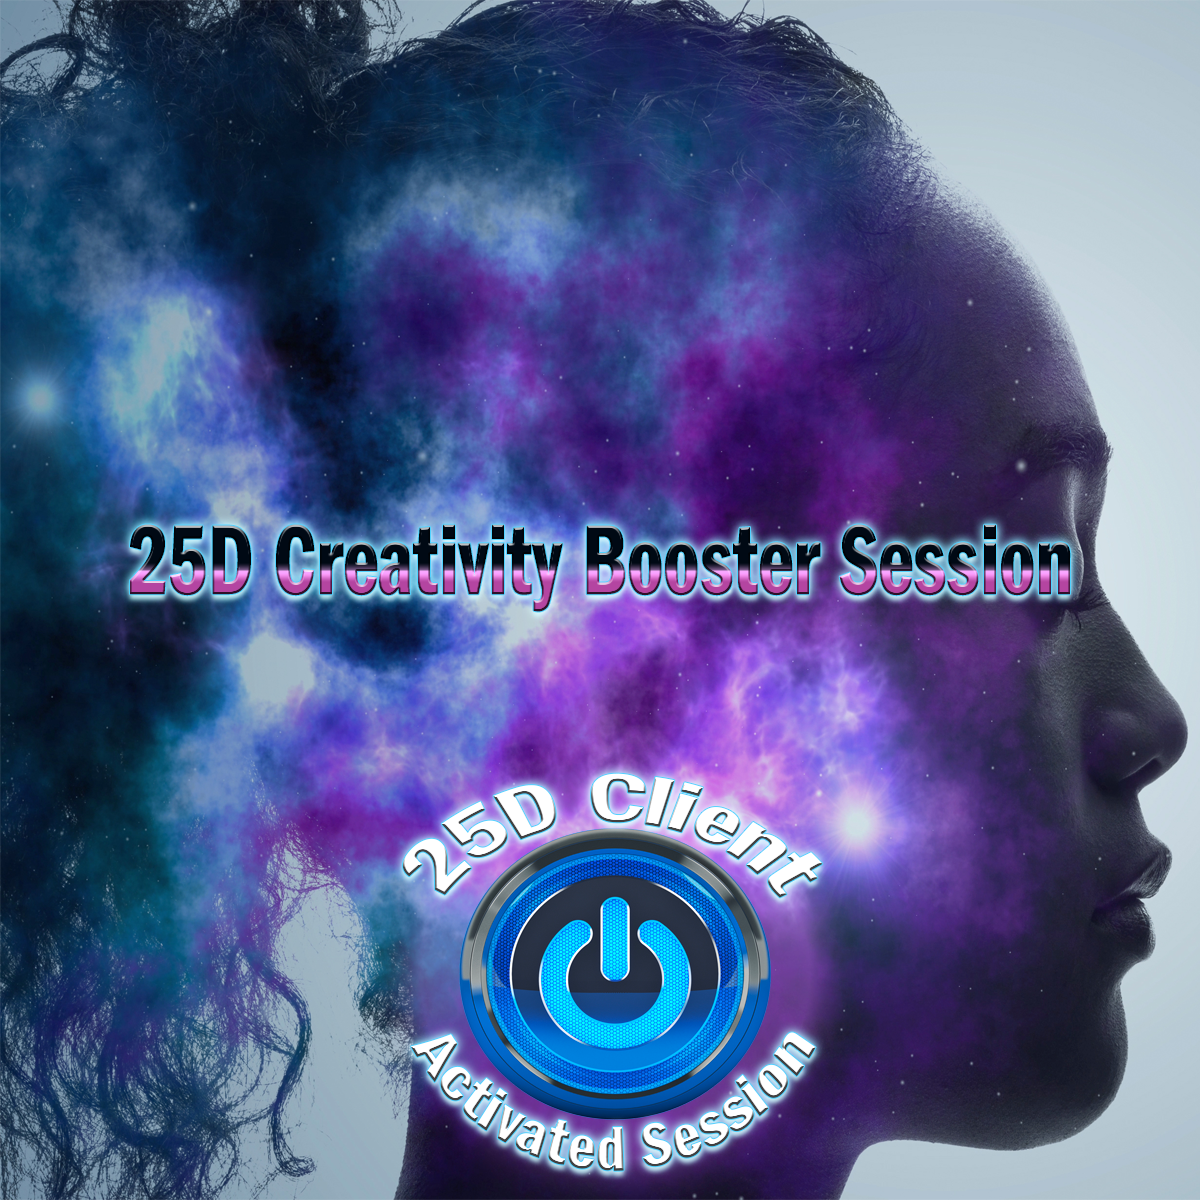 25d-client-activated-session-creativity-booster